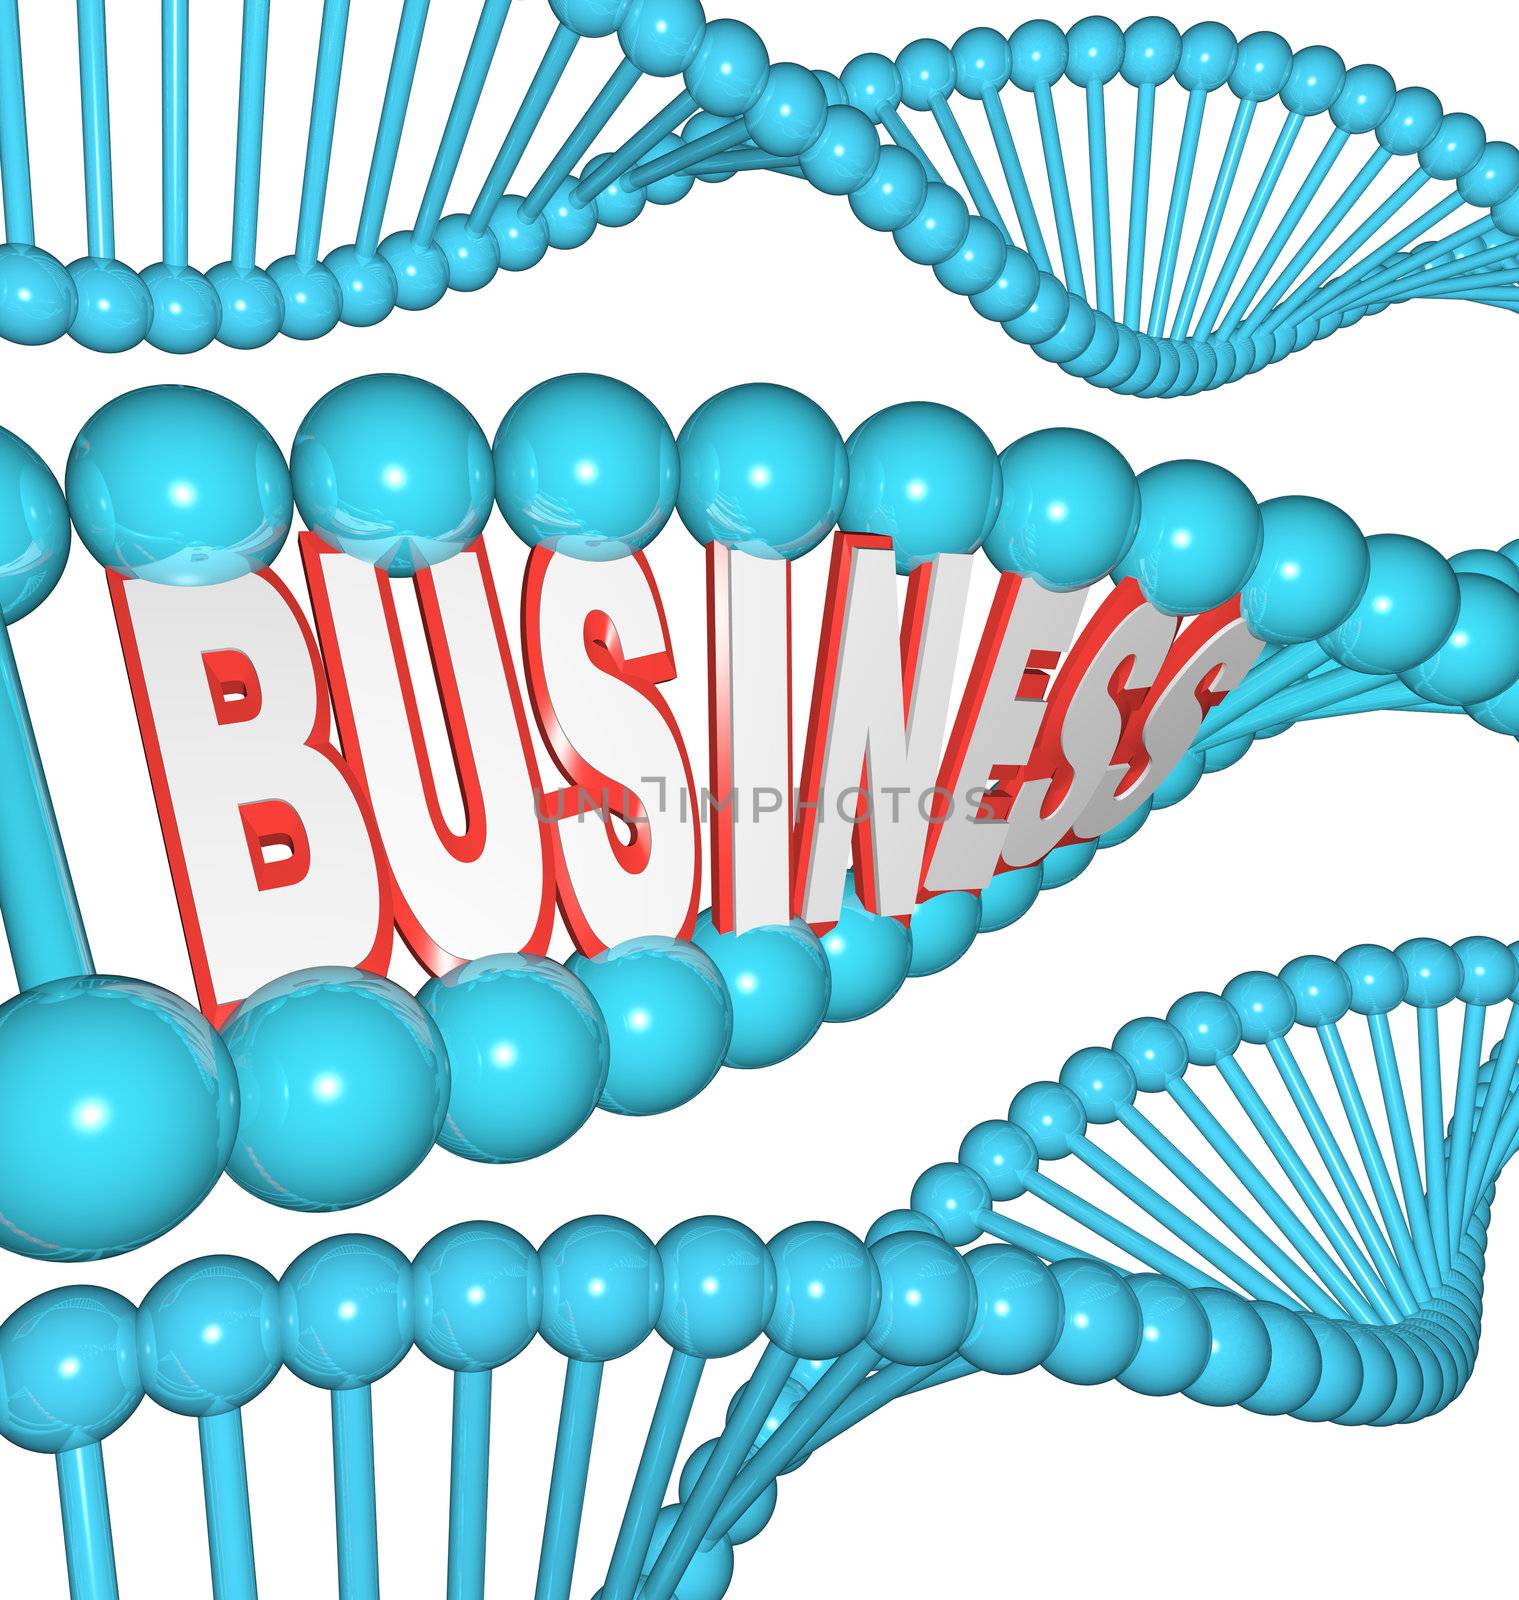 The word Business in a strand of DNA representing someone who is born to be a businessperson and has the drive to succeed in his or her genetic make-up, making success predetermined at the biological level